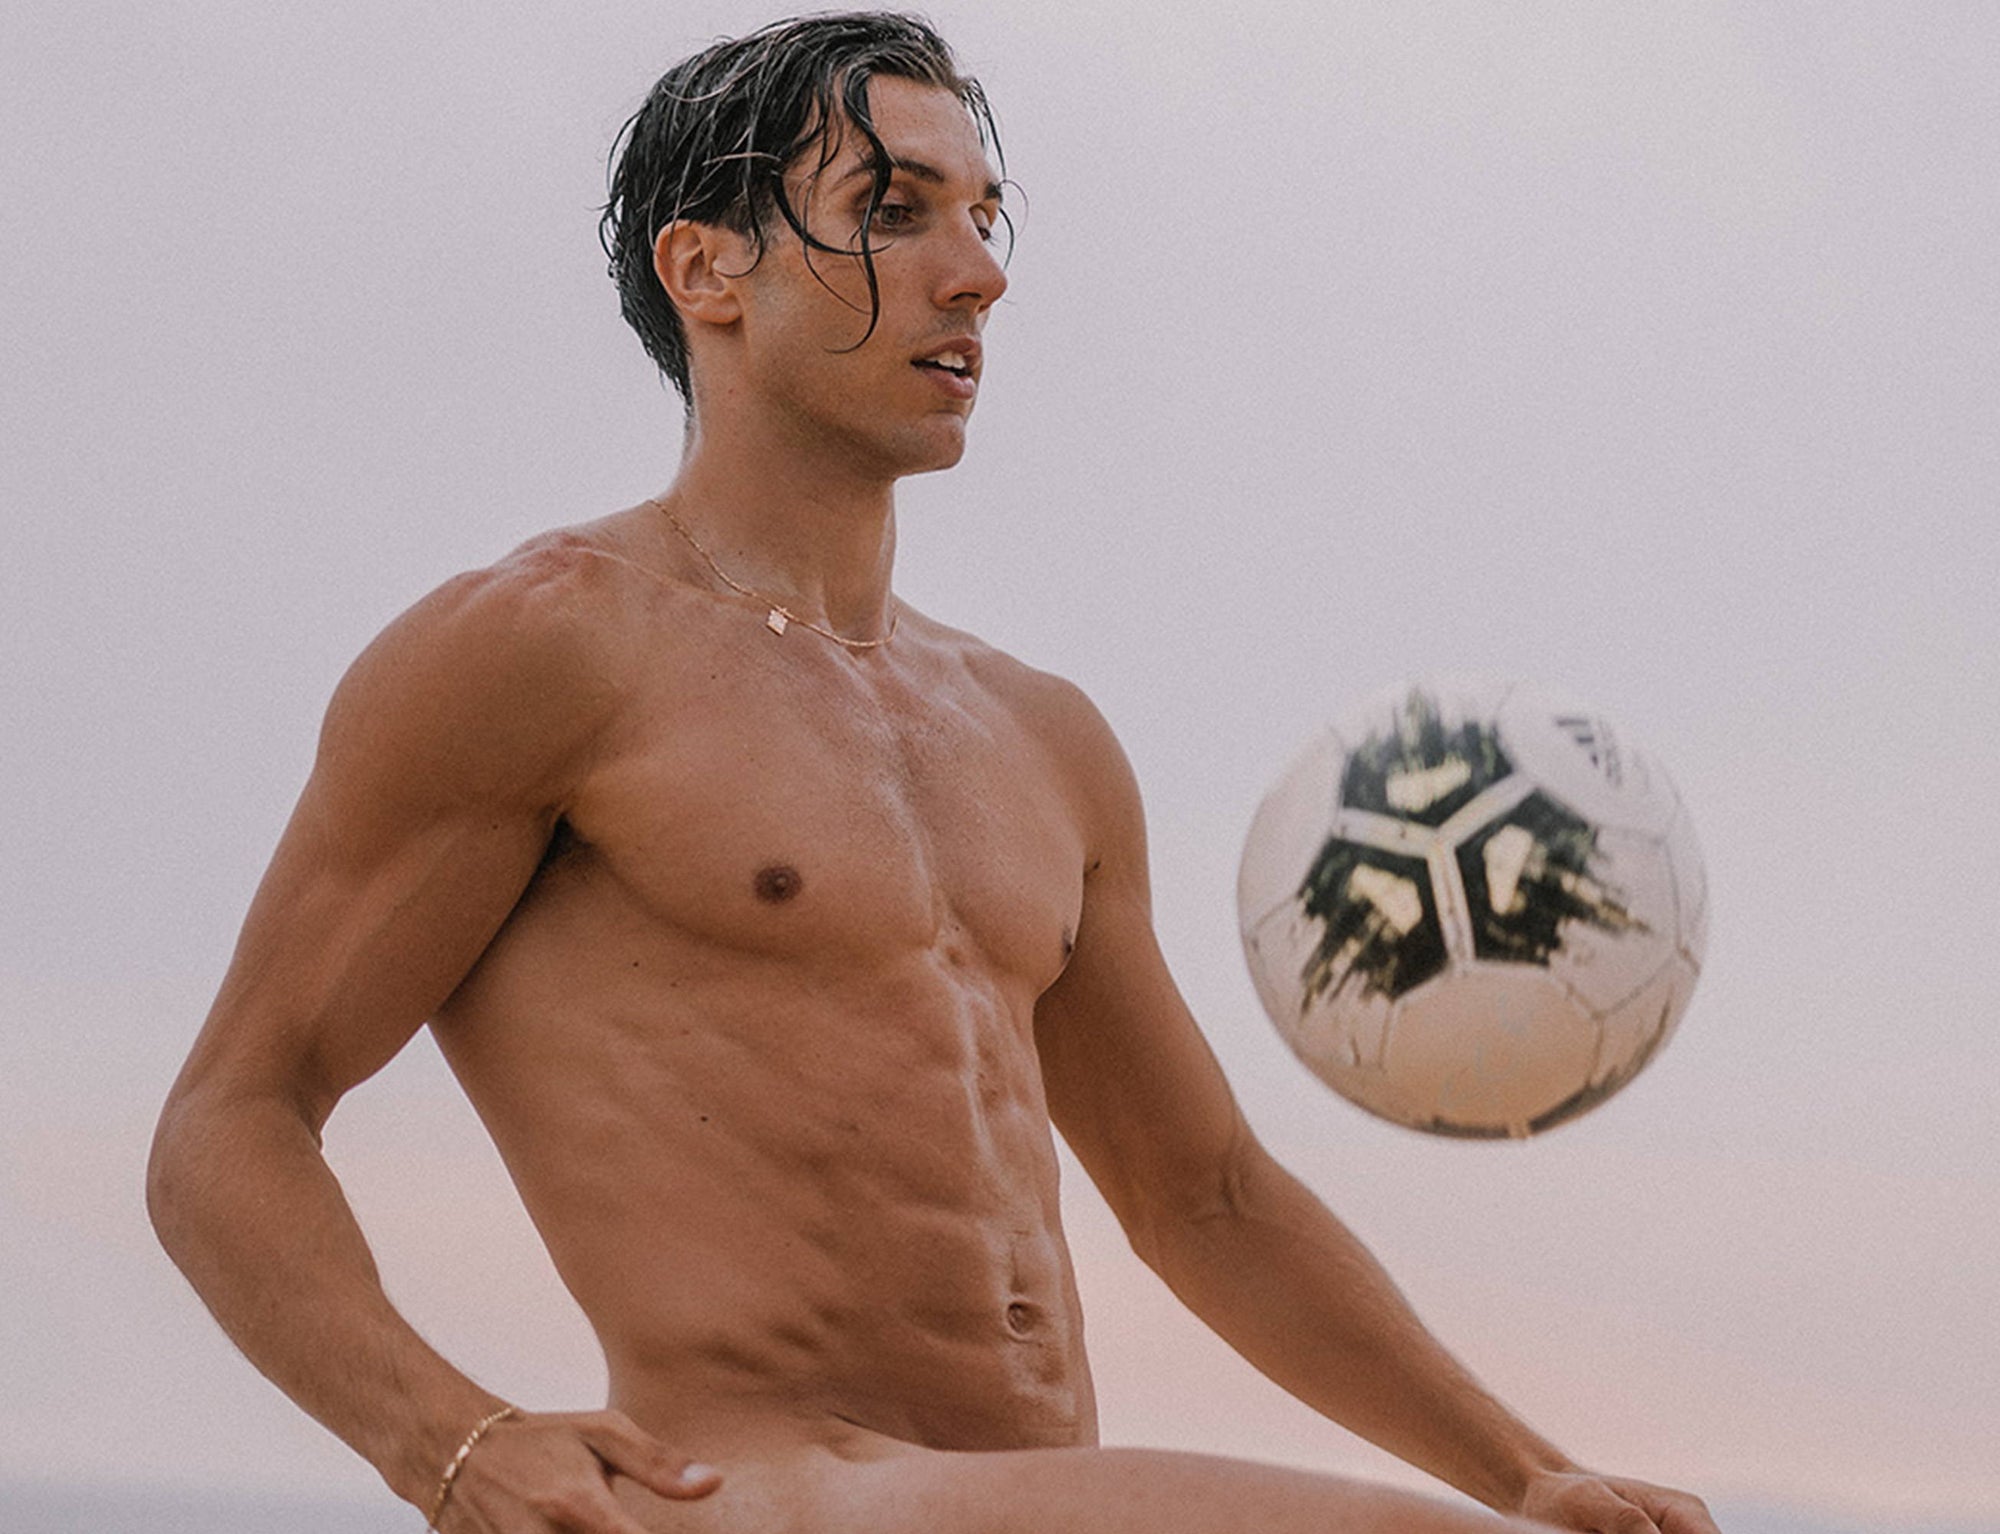 professional football player and model Joël Conceição tells Yummy all about his origins, his passion for football, and his take on intimacy and sexiness